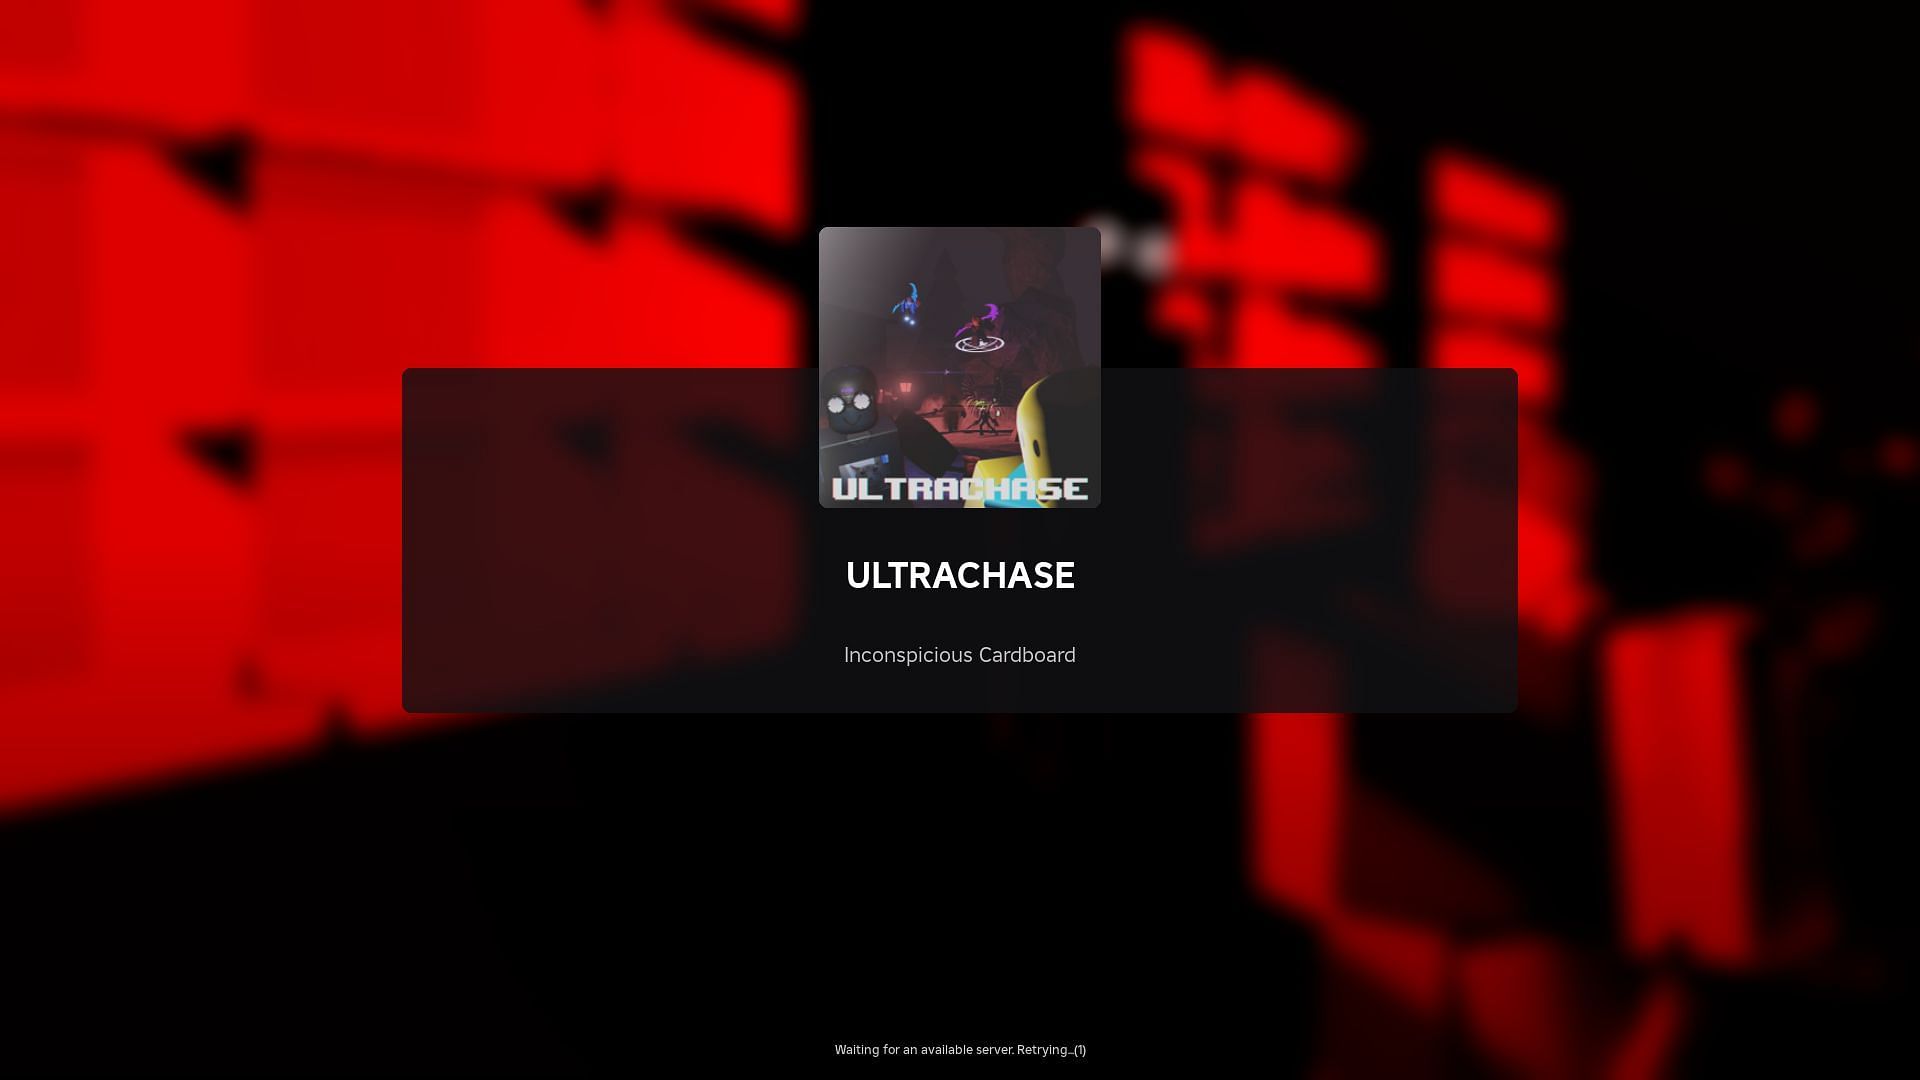 A survival guide to Ultrachase